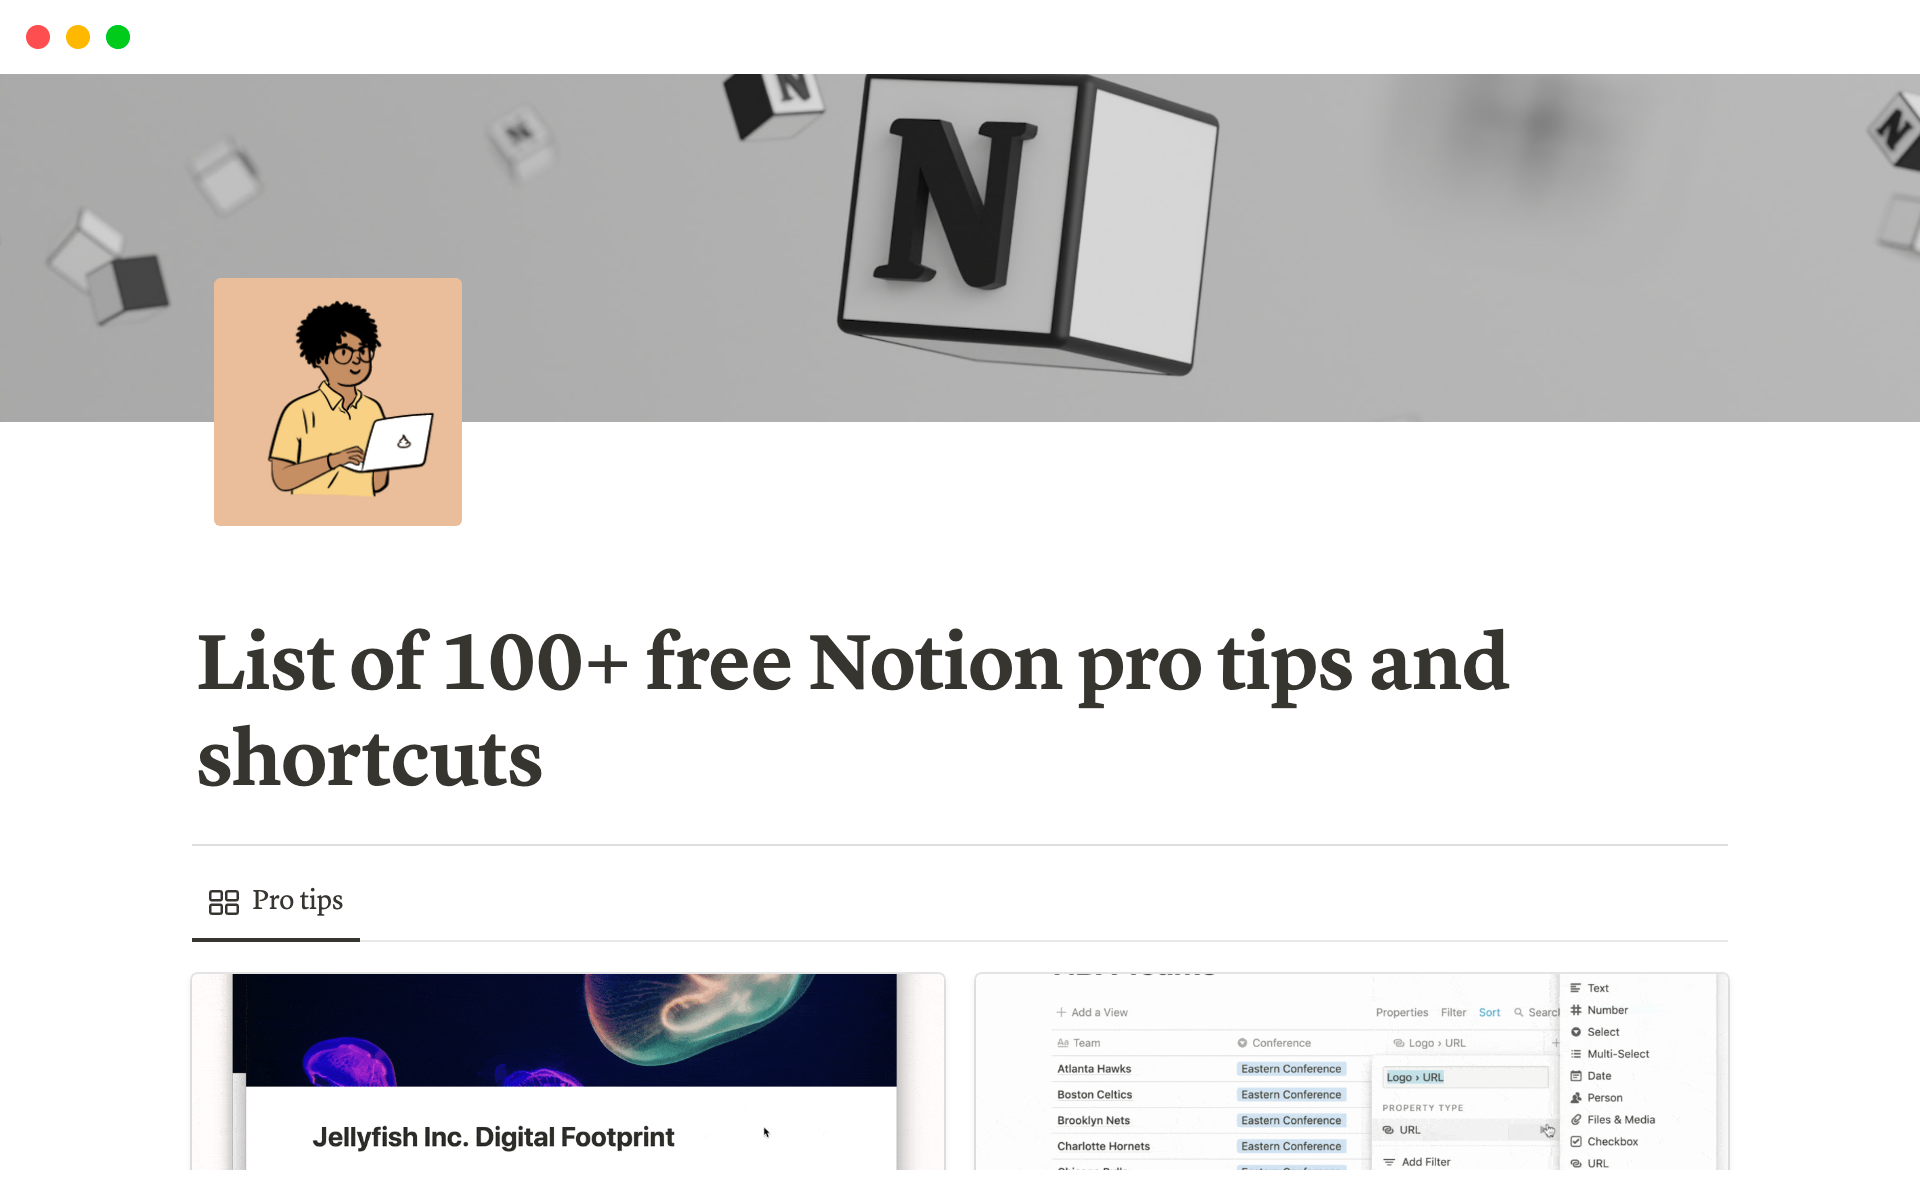 This template is designed to educate new and even experienced Notion users how to learn and utilize notion tips and shortcuts to enhance their productivity and make their workflow using Notion alot more smoother.